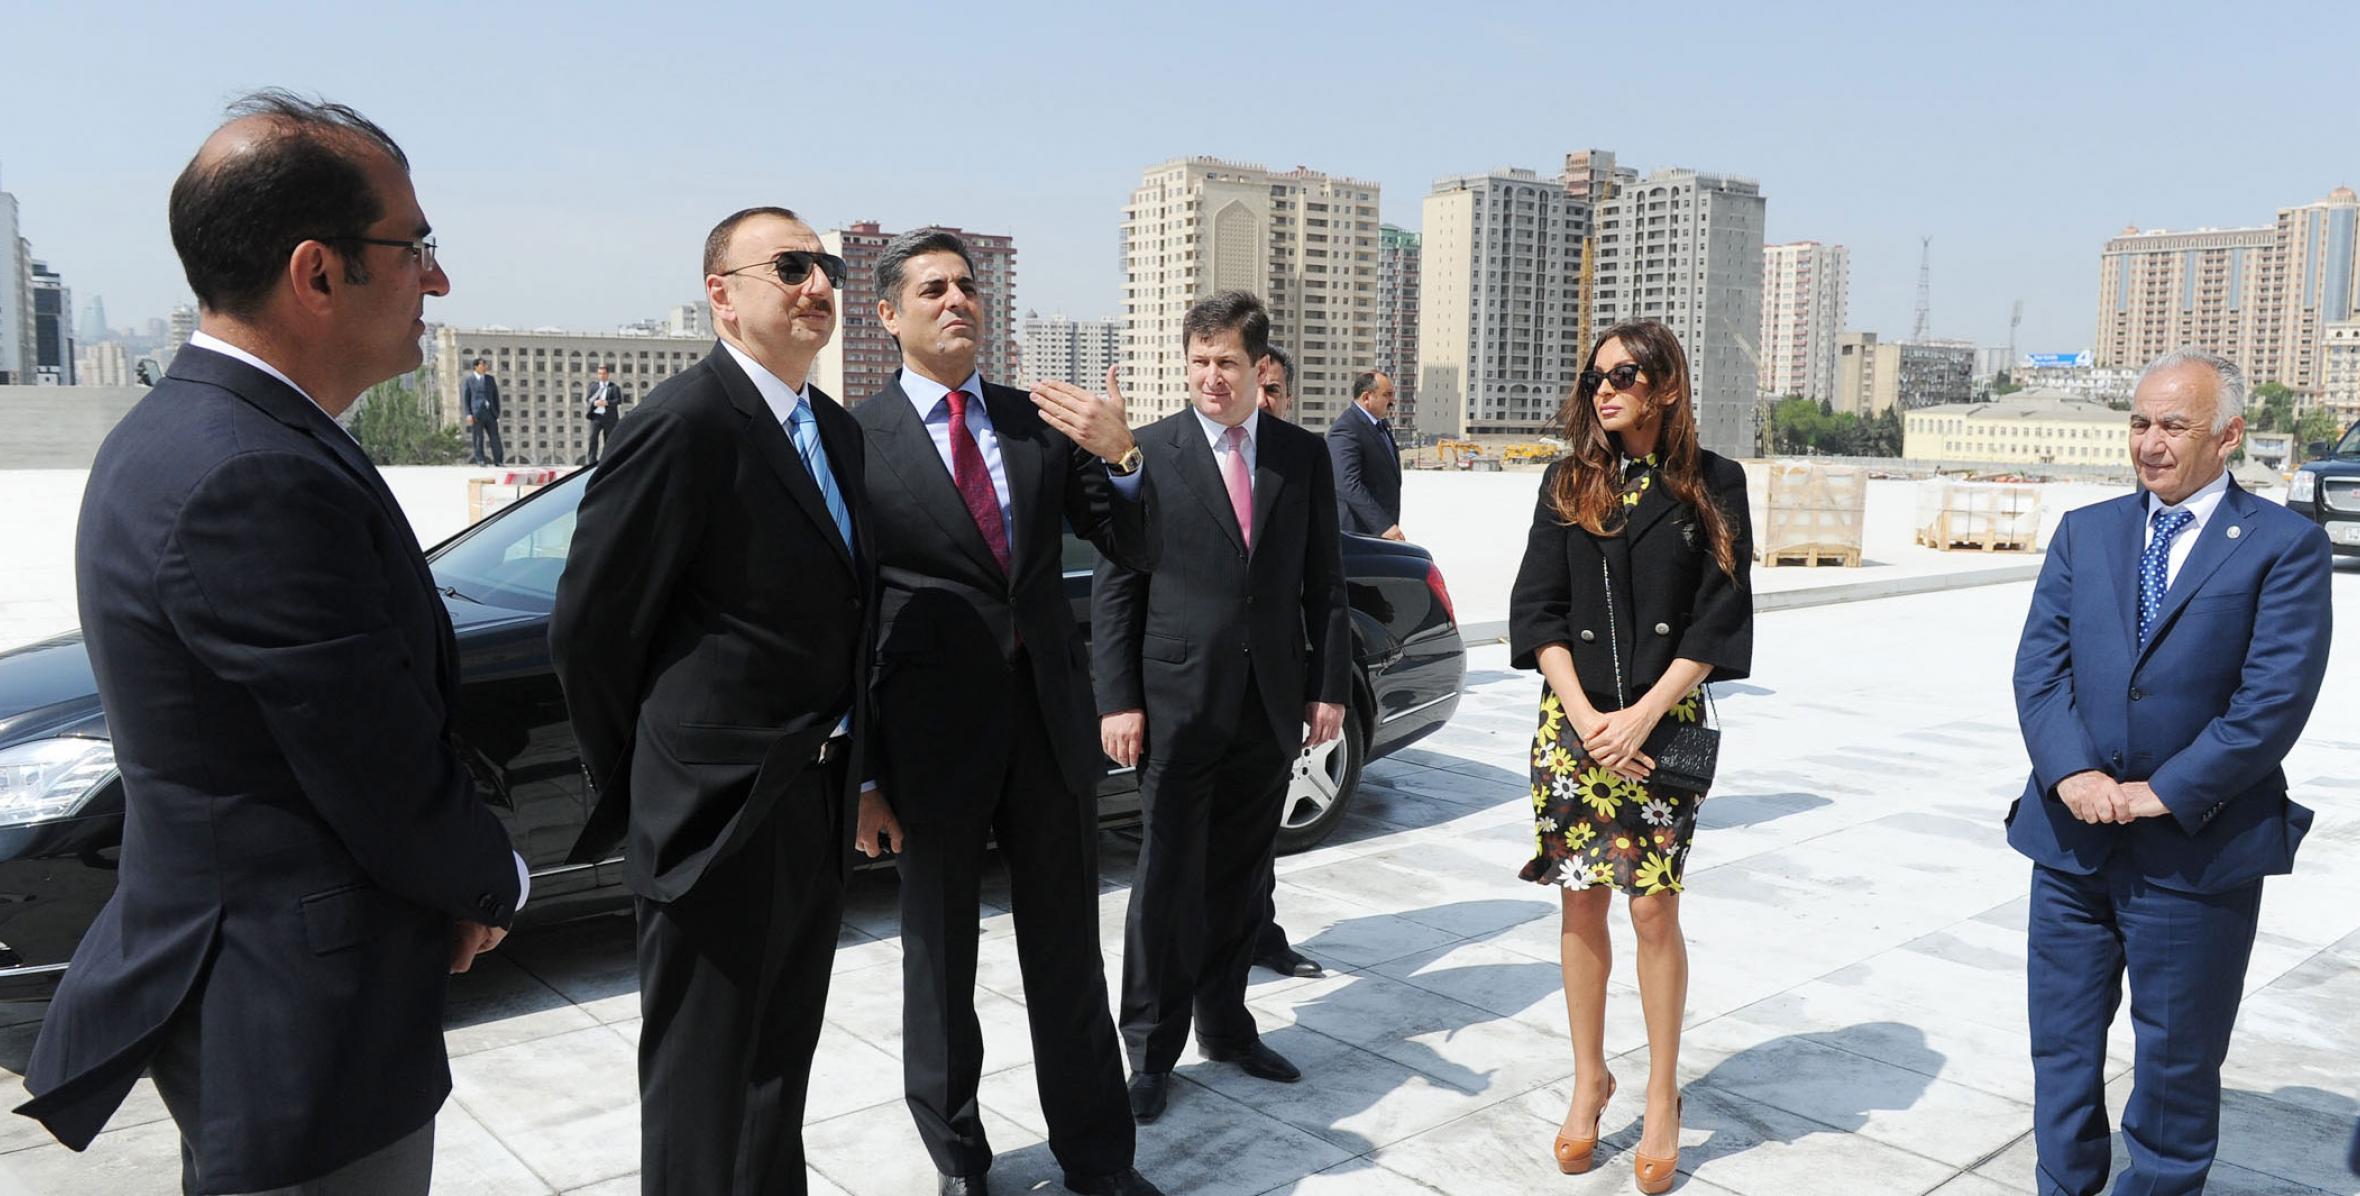 Ilham Aliyev reviewed the work carried out at the Heydar Aliyev Center and park outside the Hilton Hotel